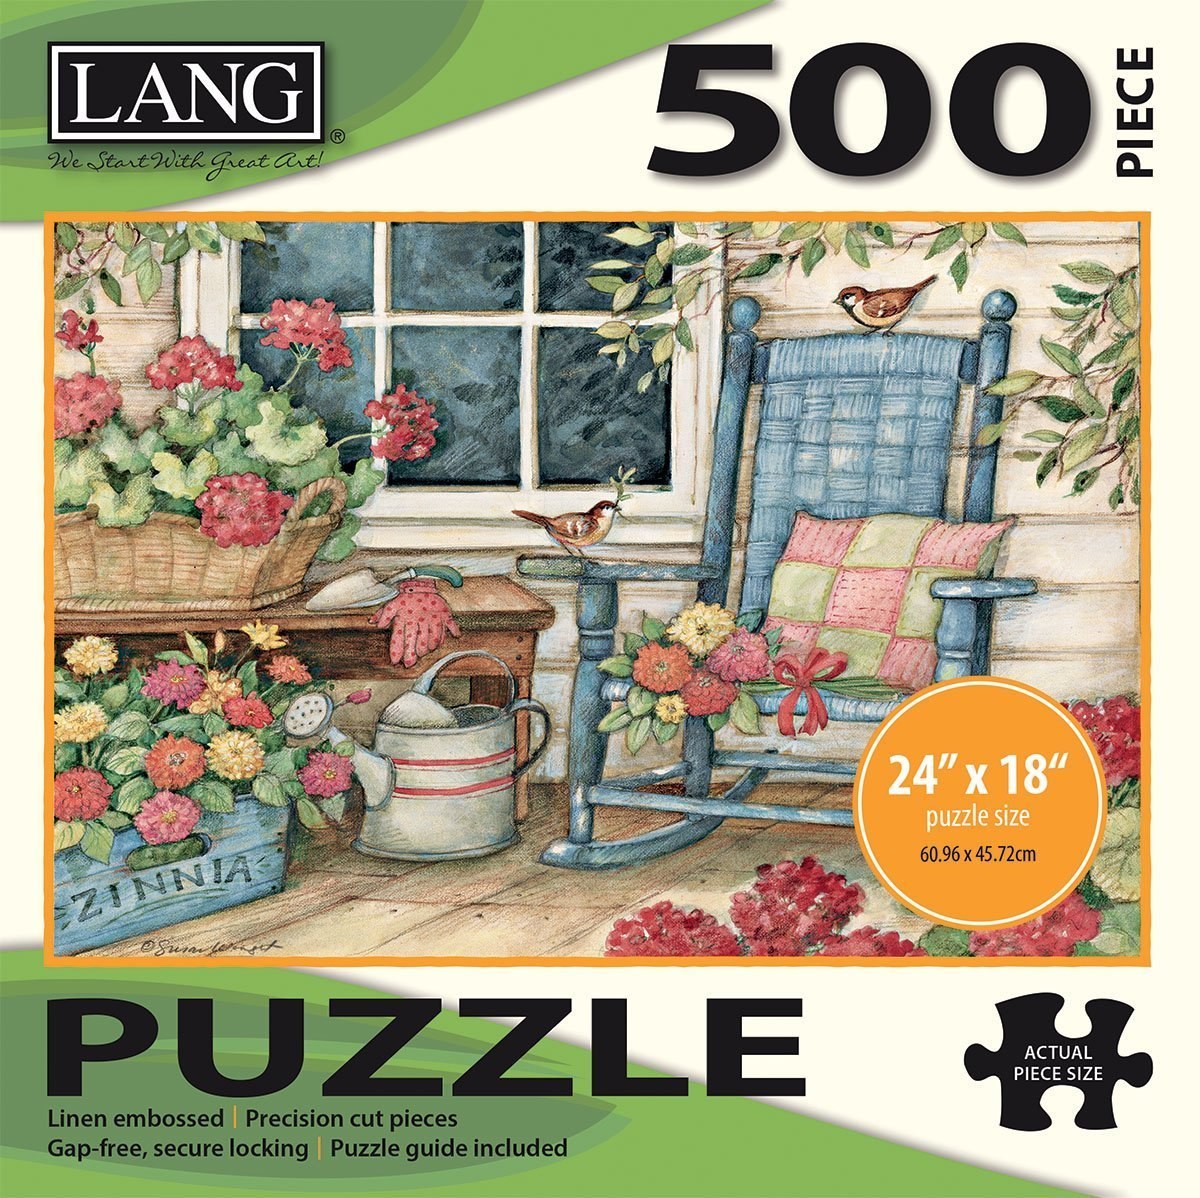 Rocking Chair - 500pc Jigsaw Puzzle by Lang  			  					NEW - image 1